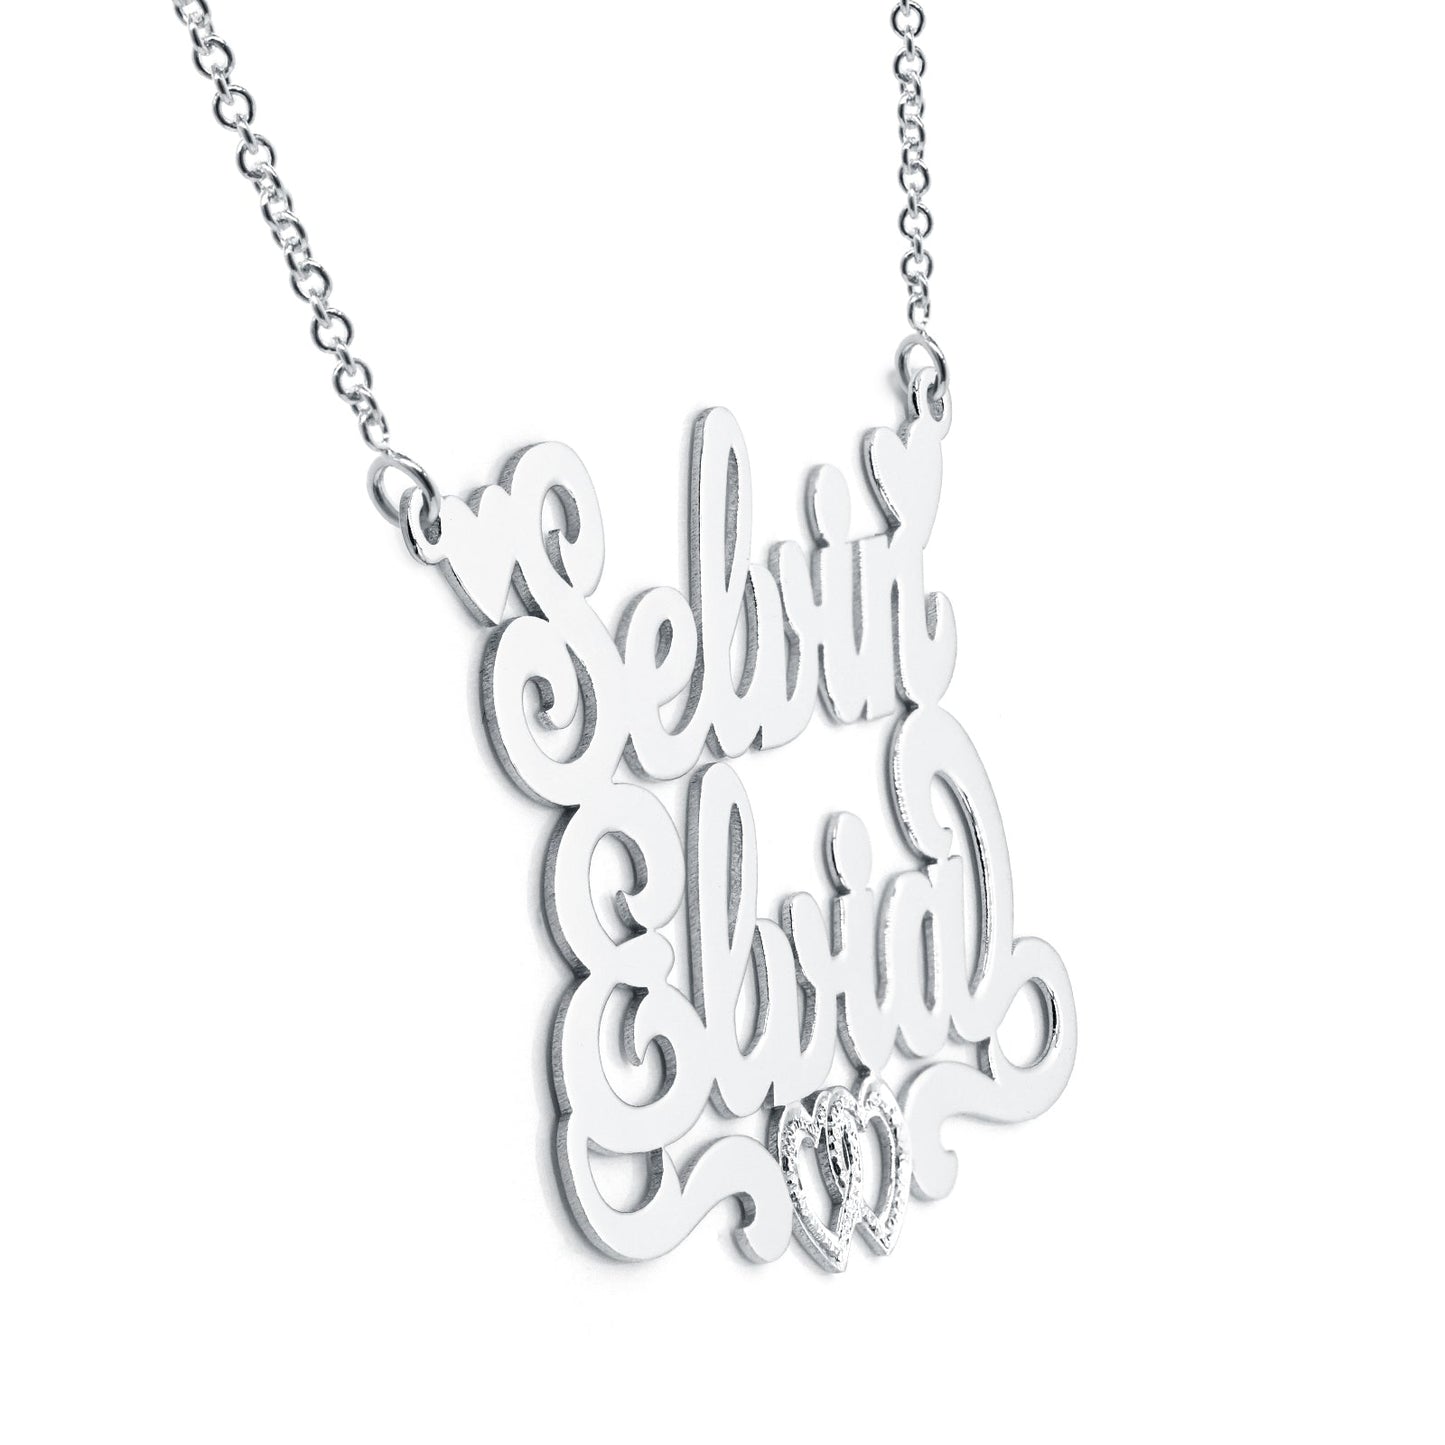 Personalized 2 Name Nameplate Necklace with Hearts in Solid Sterling Silver